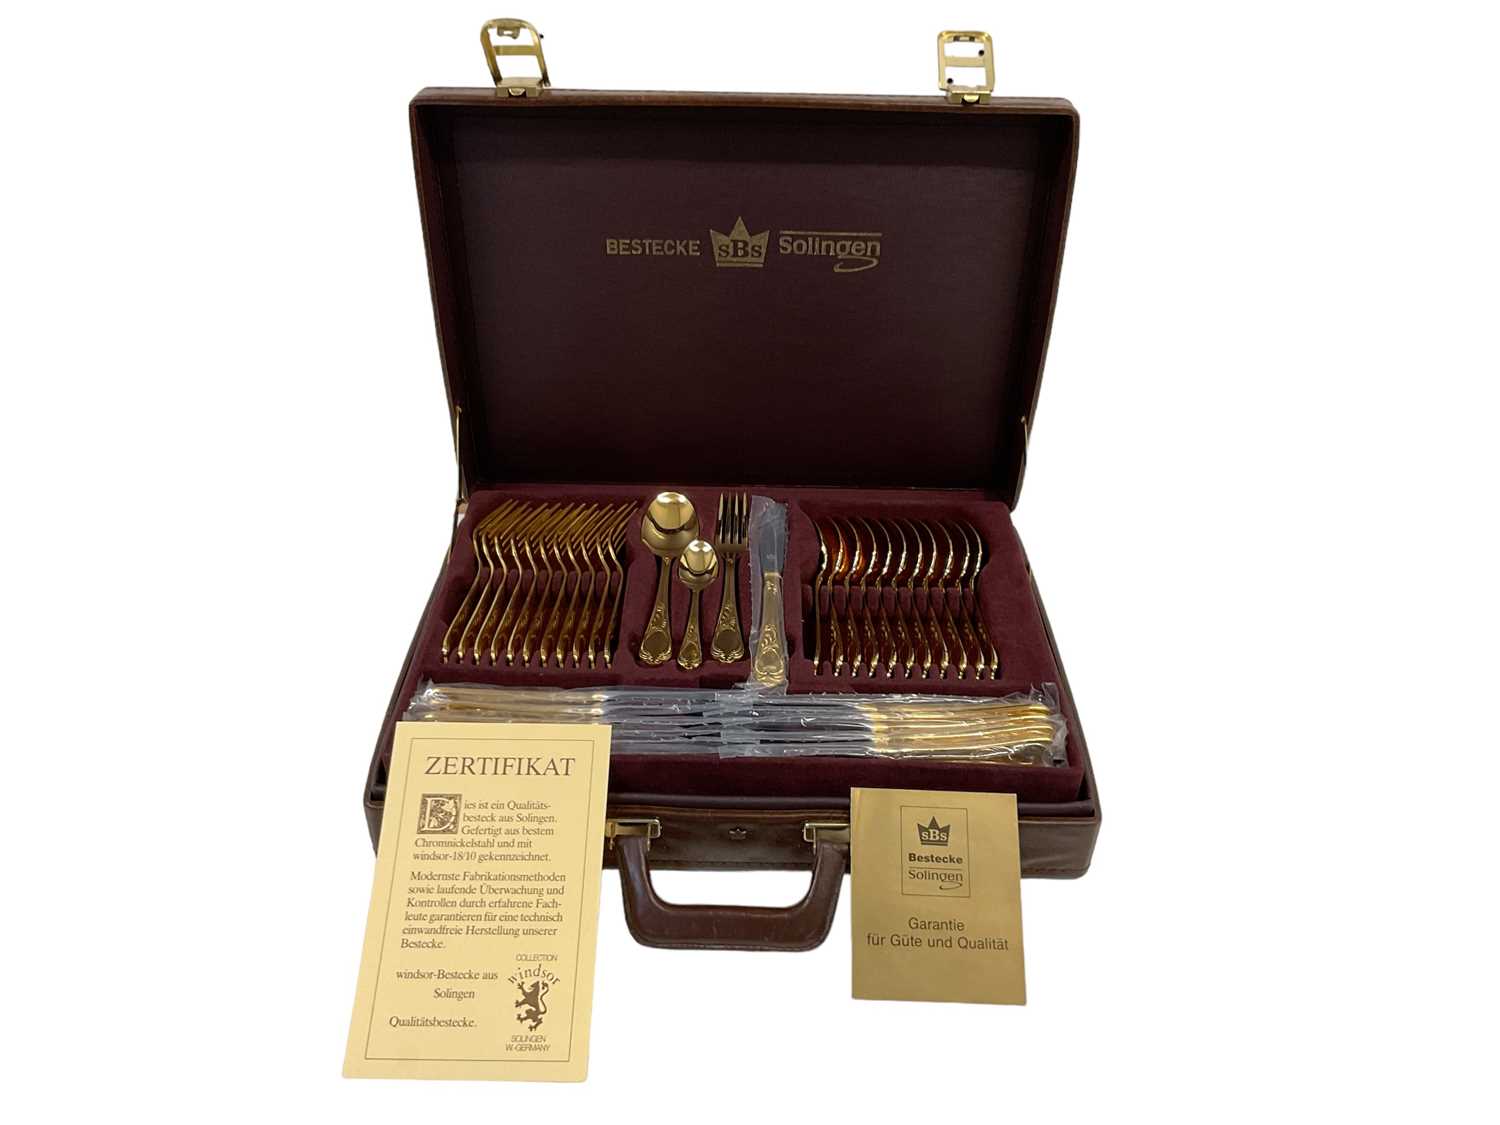 BESTECKE SOLINGEN; a leather cased twelve setting canteen of gold plated cutlery, stamped '23/24